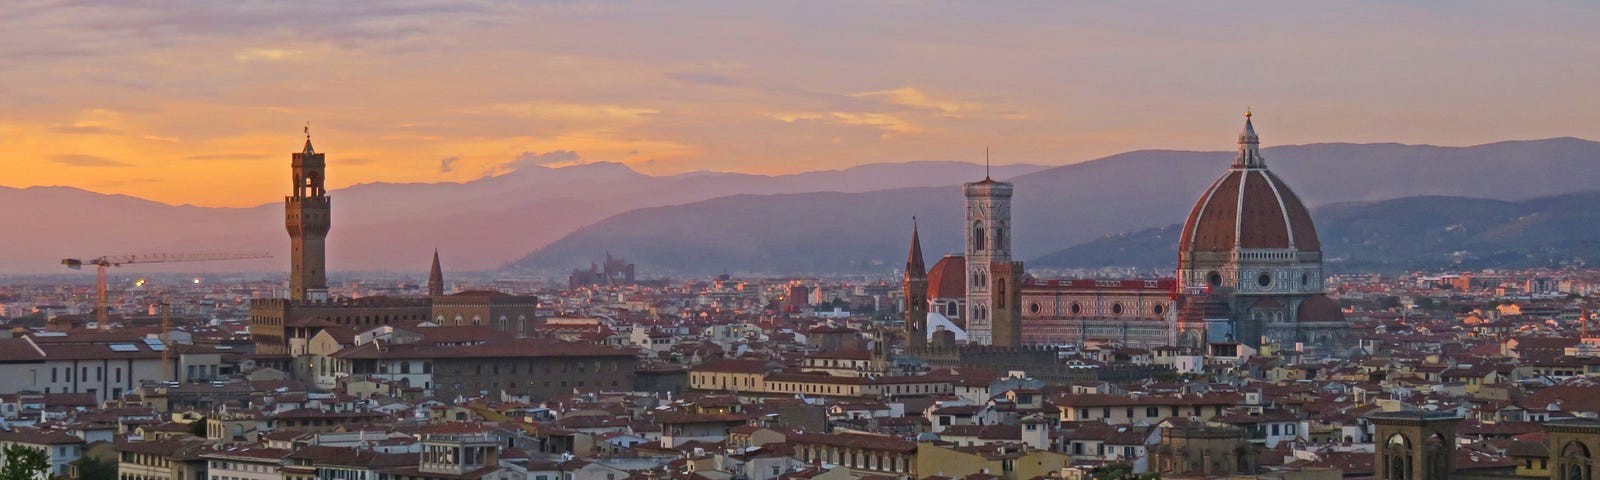 View of Florence, Italy. The buildings and the Duomo with the hills in the background as the sun is setting.